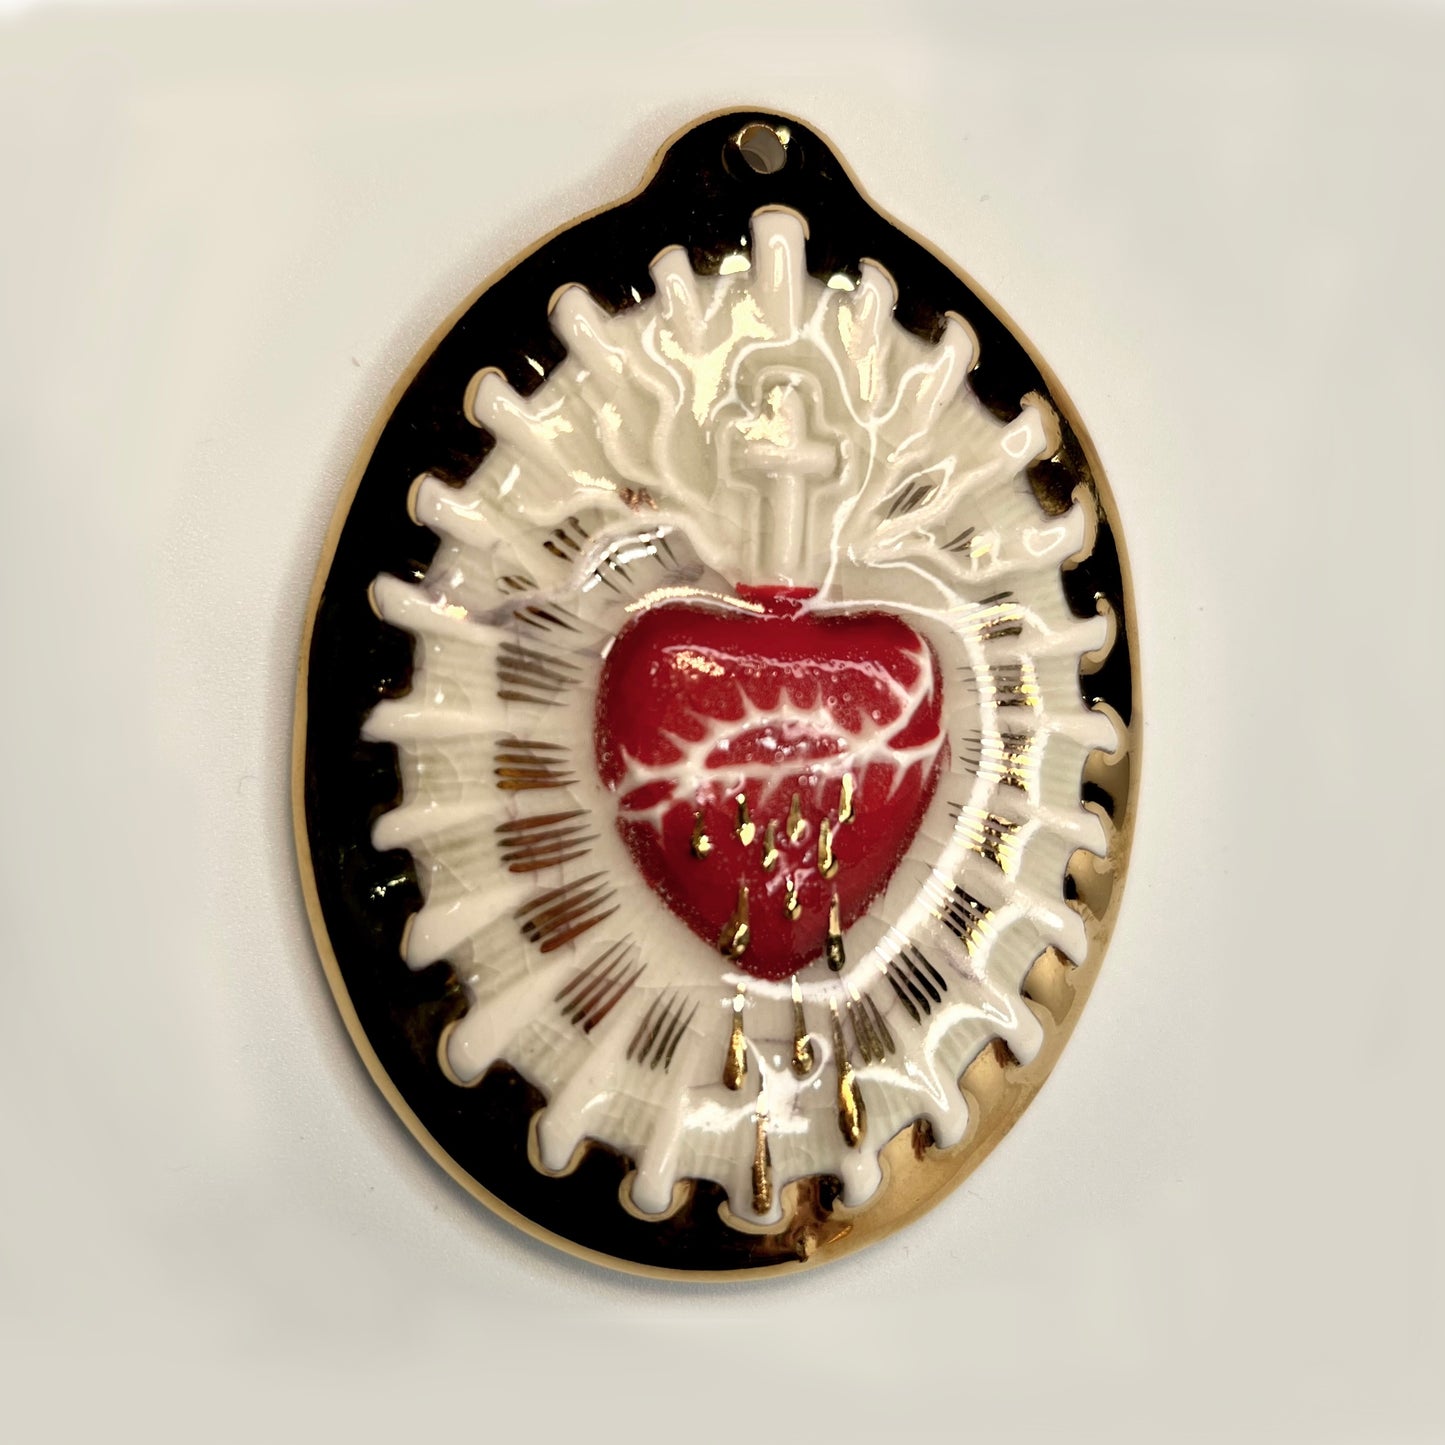 Product Image: Sacred Heart 7 - Hand crafted Porcelain Home Ornament. Red Bleeding Sacred Heart in thorns.